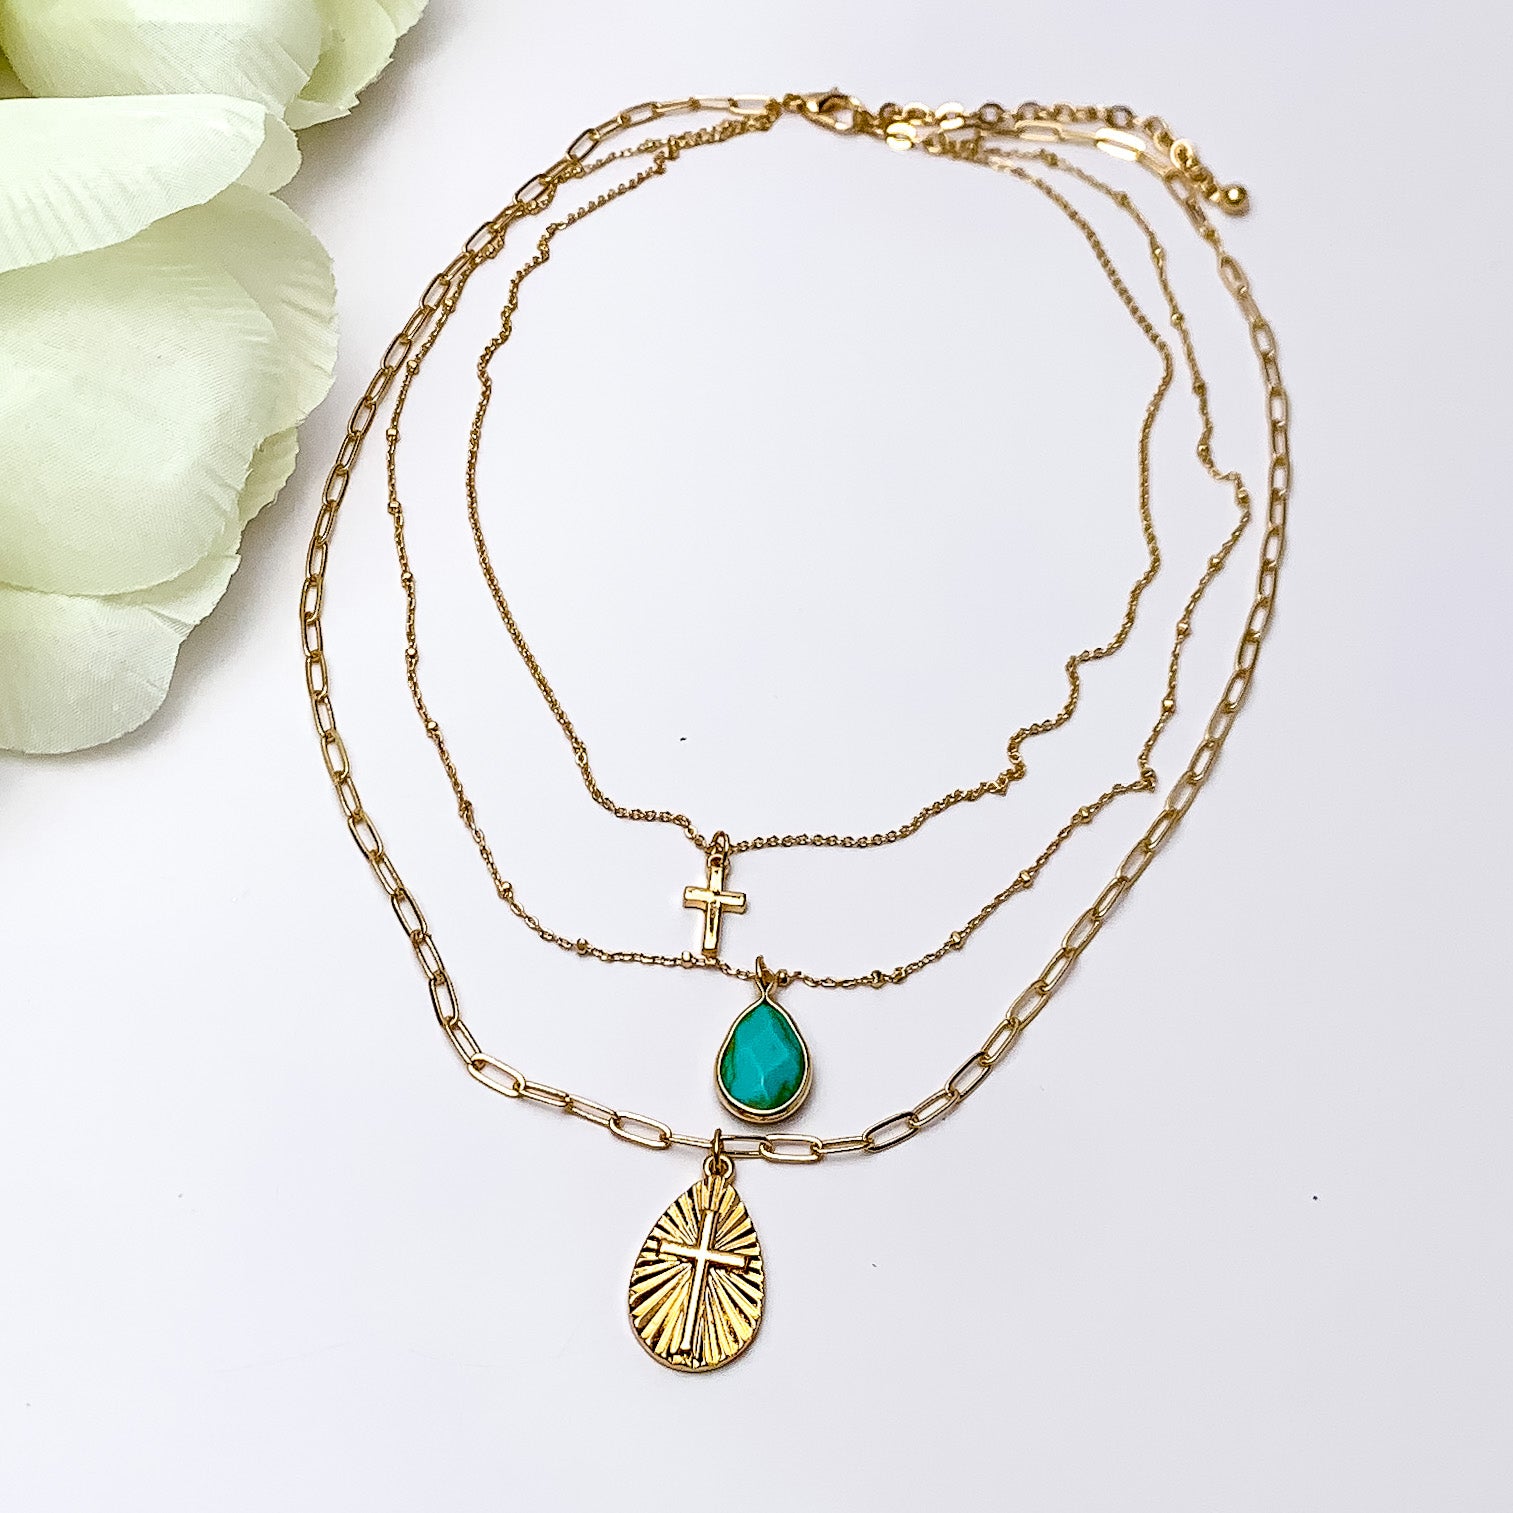 Three layered Gold Tone Necklace With Multiple Designed Charms. Pictured on a white background with a piece of wood behind the necklace.